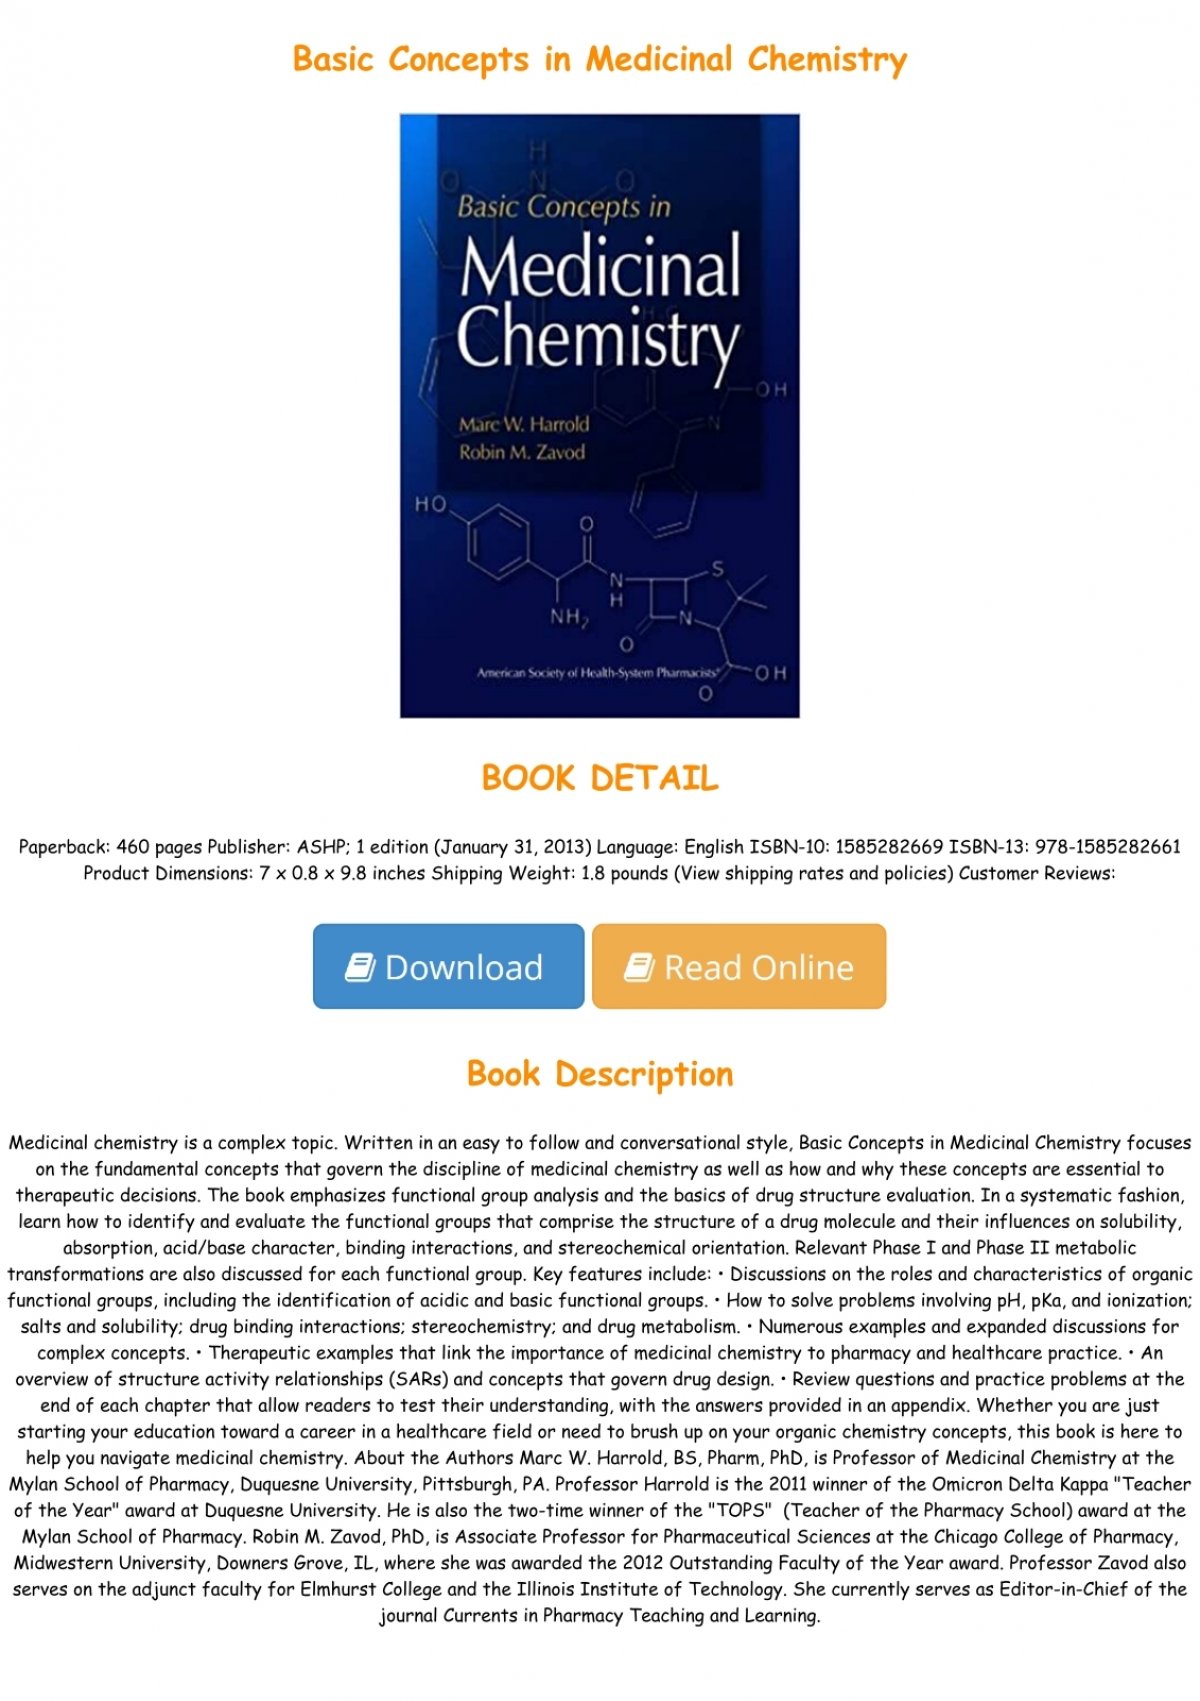 Basic Concepts in Medicinal Chemistry Full PDF Online